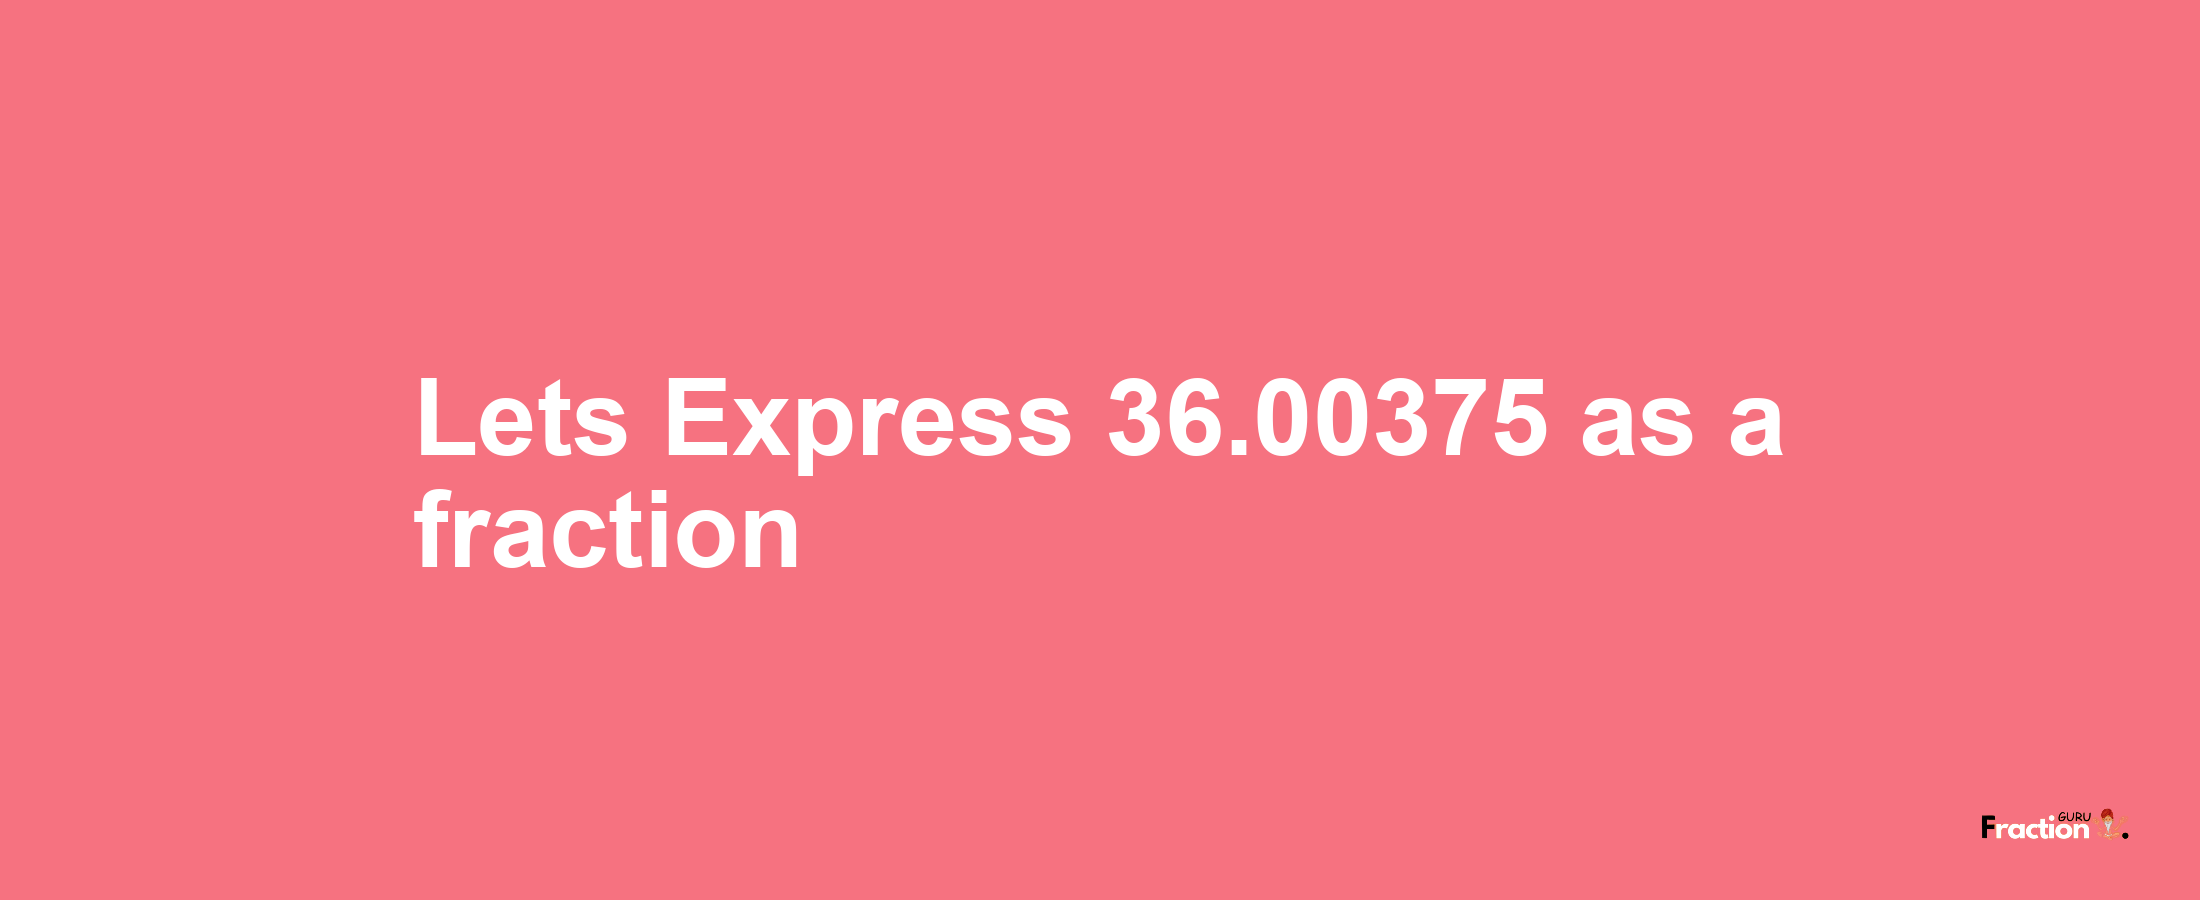 Lets Express 36.00375 as afraction